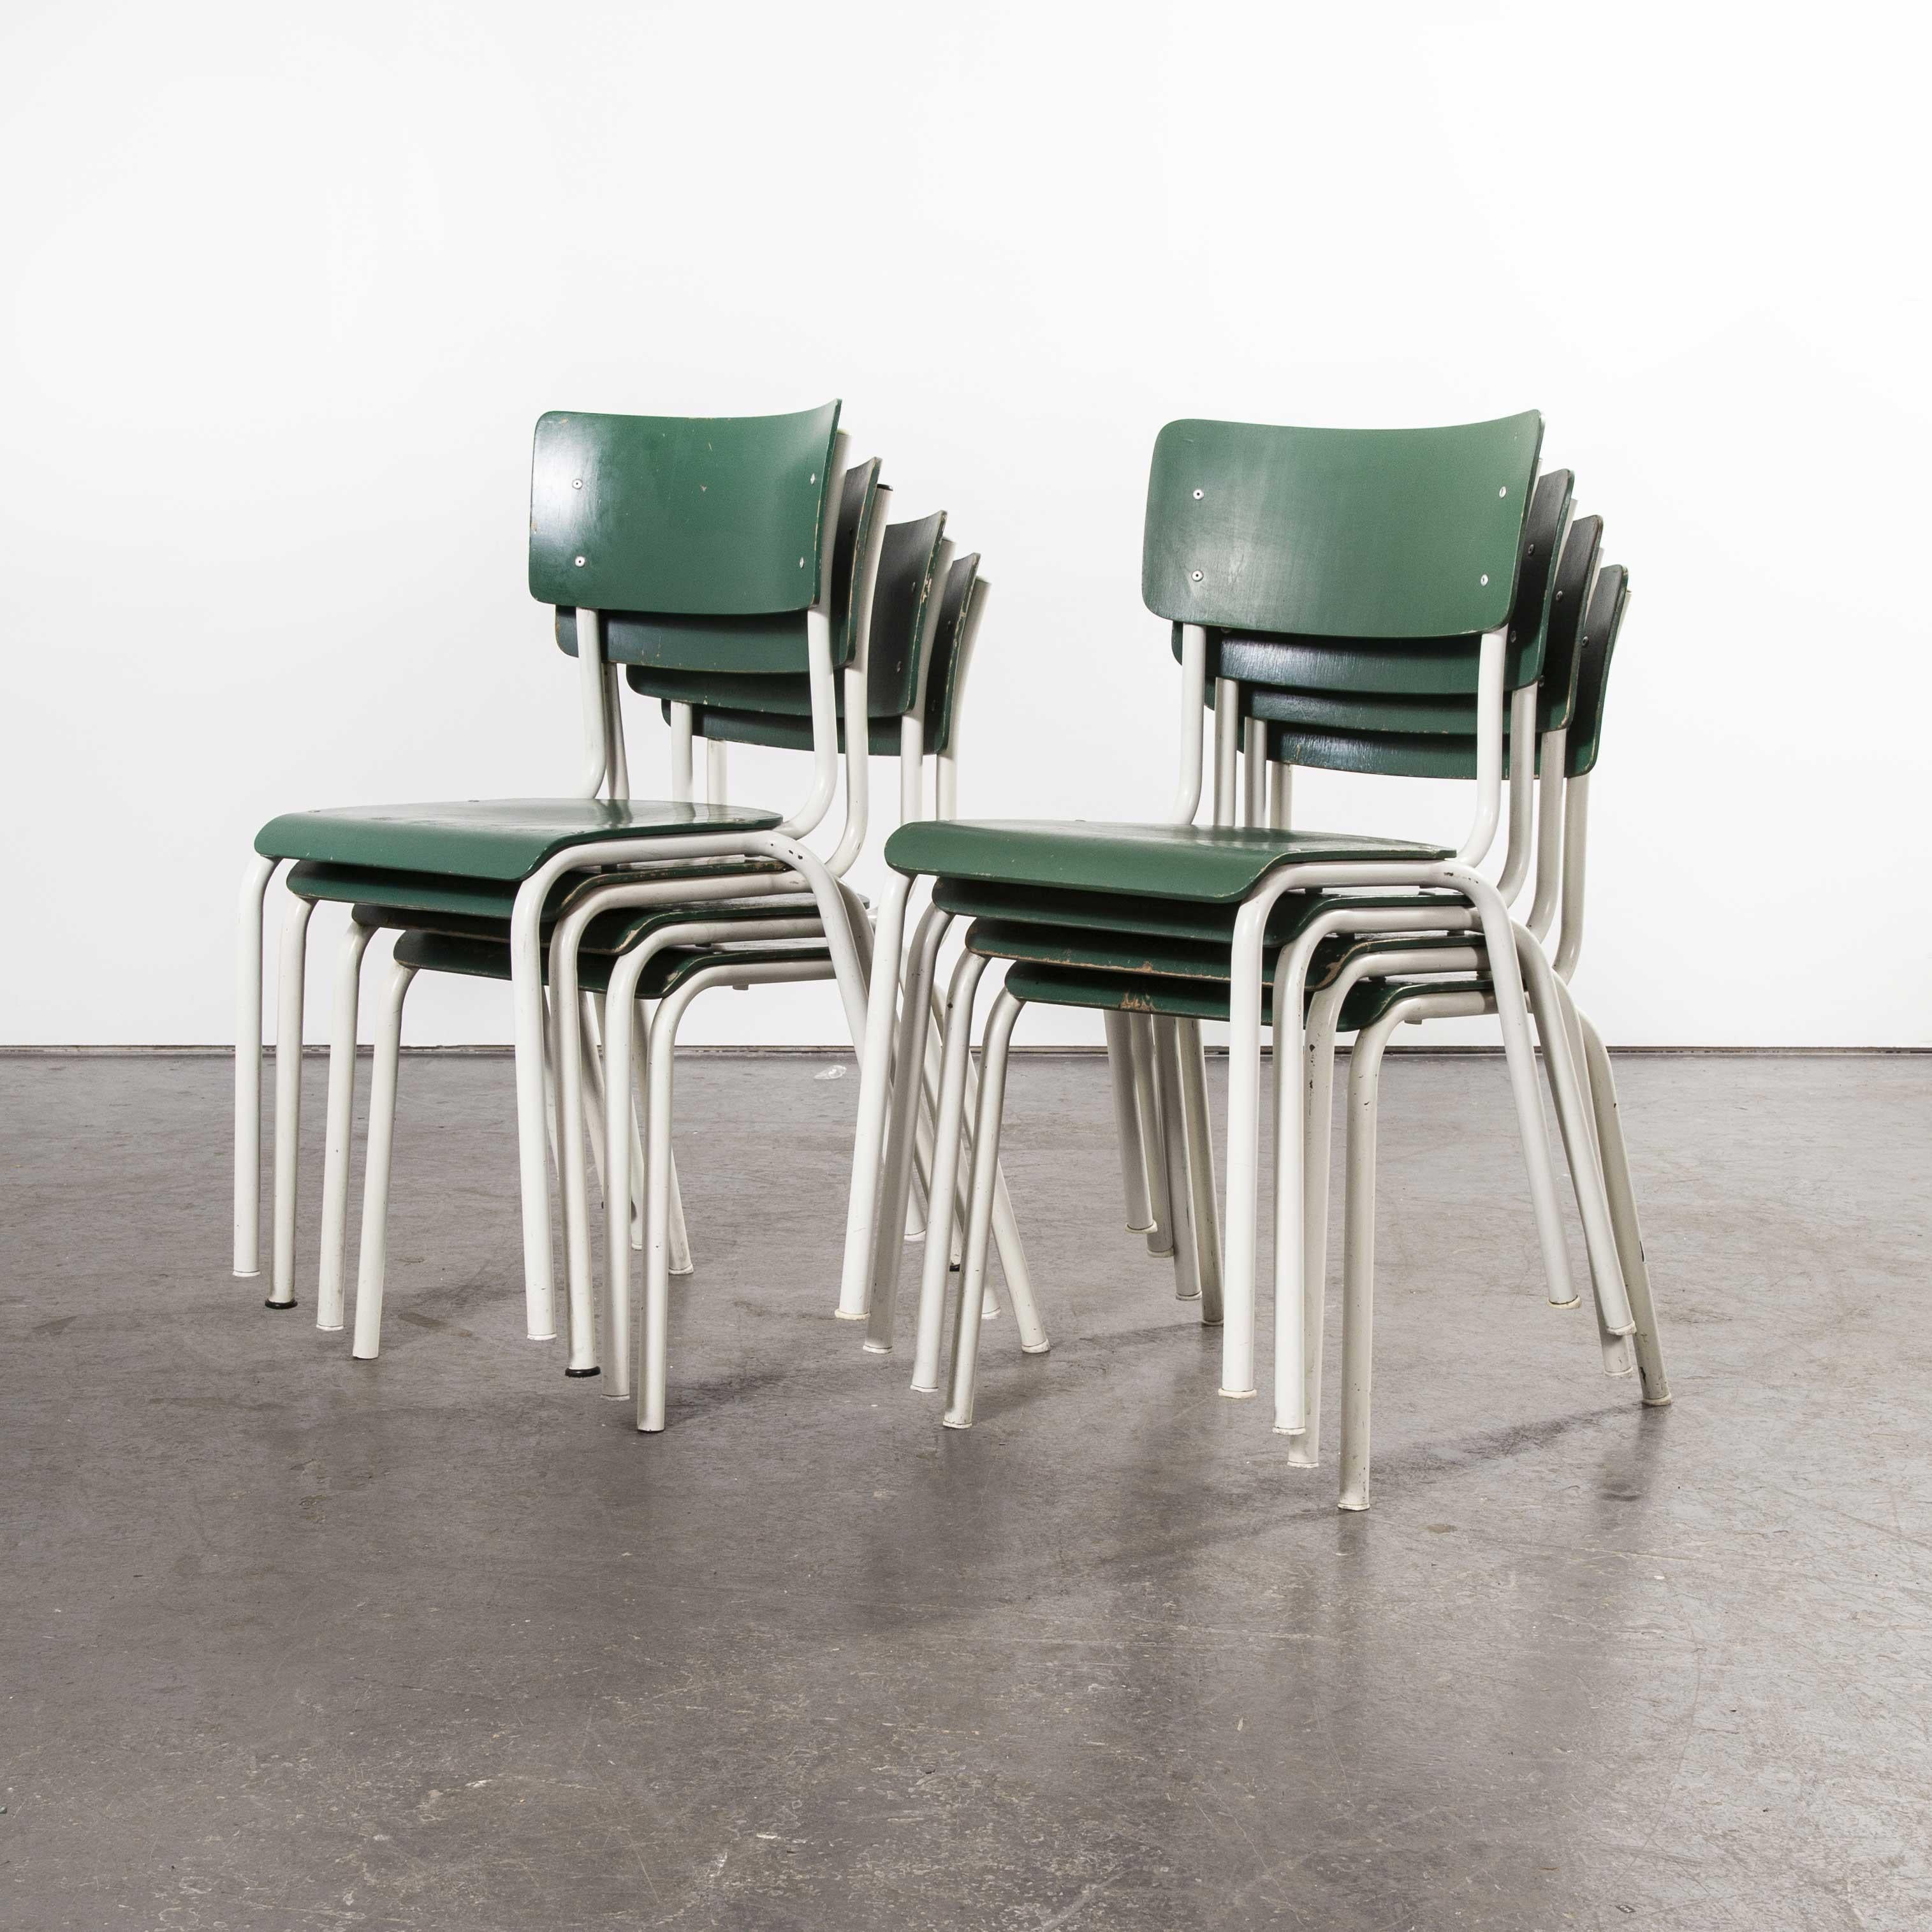 Bentwood 1970s Thonet Stacking Dining Chairs for the German Army, Green, Set of Eight